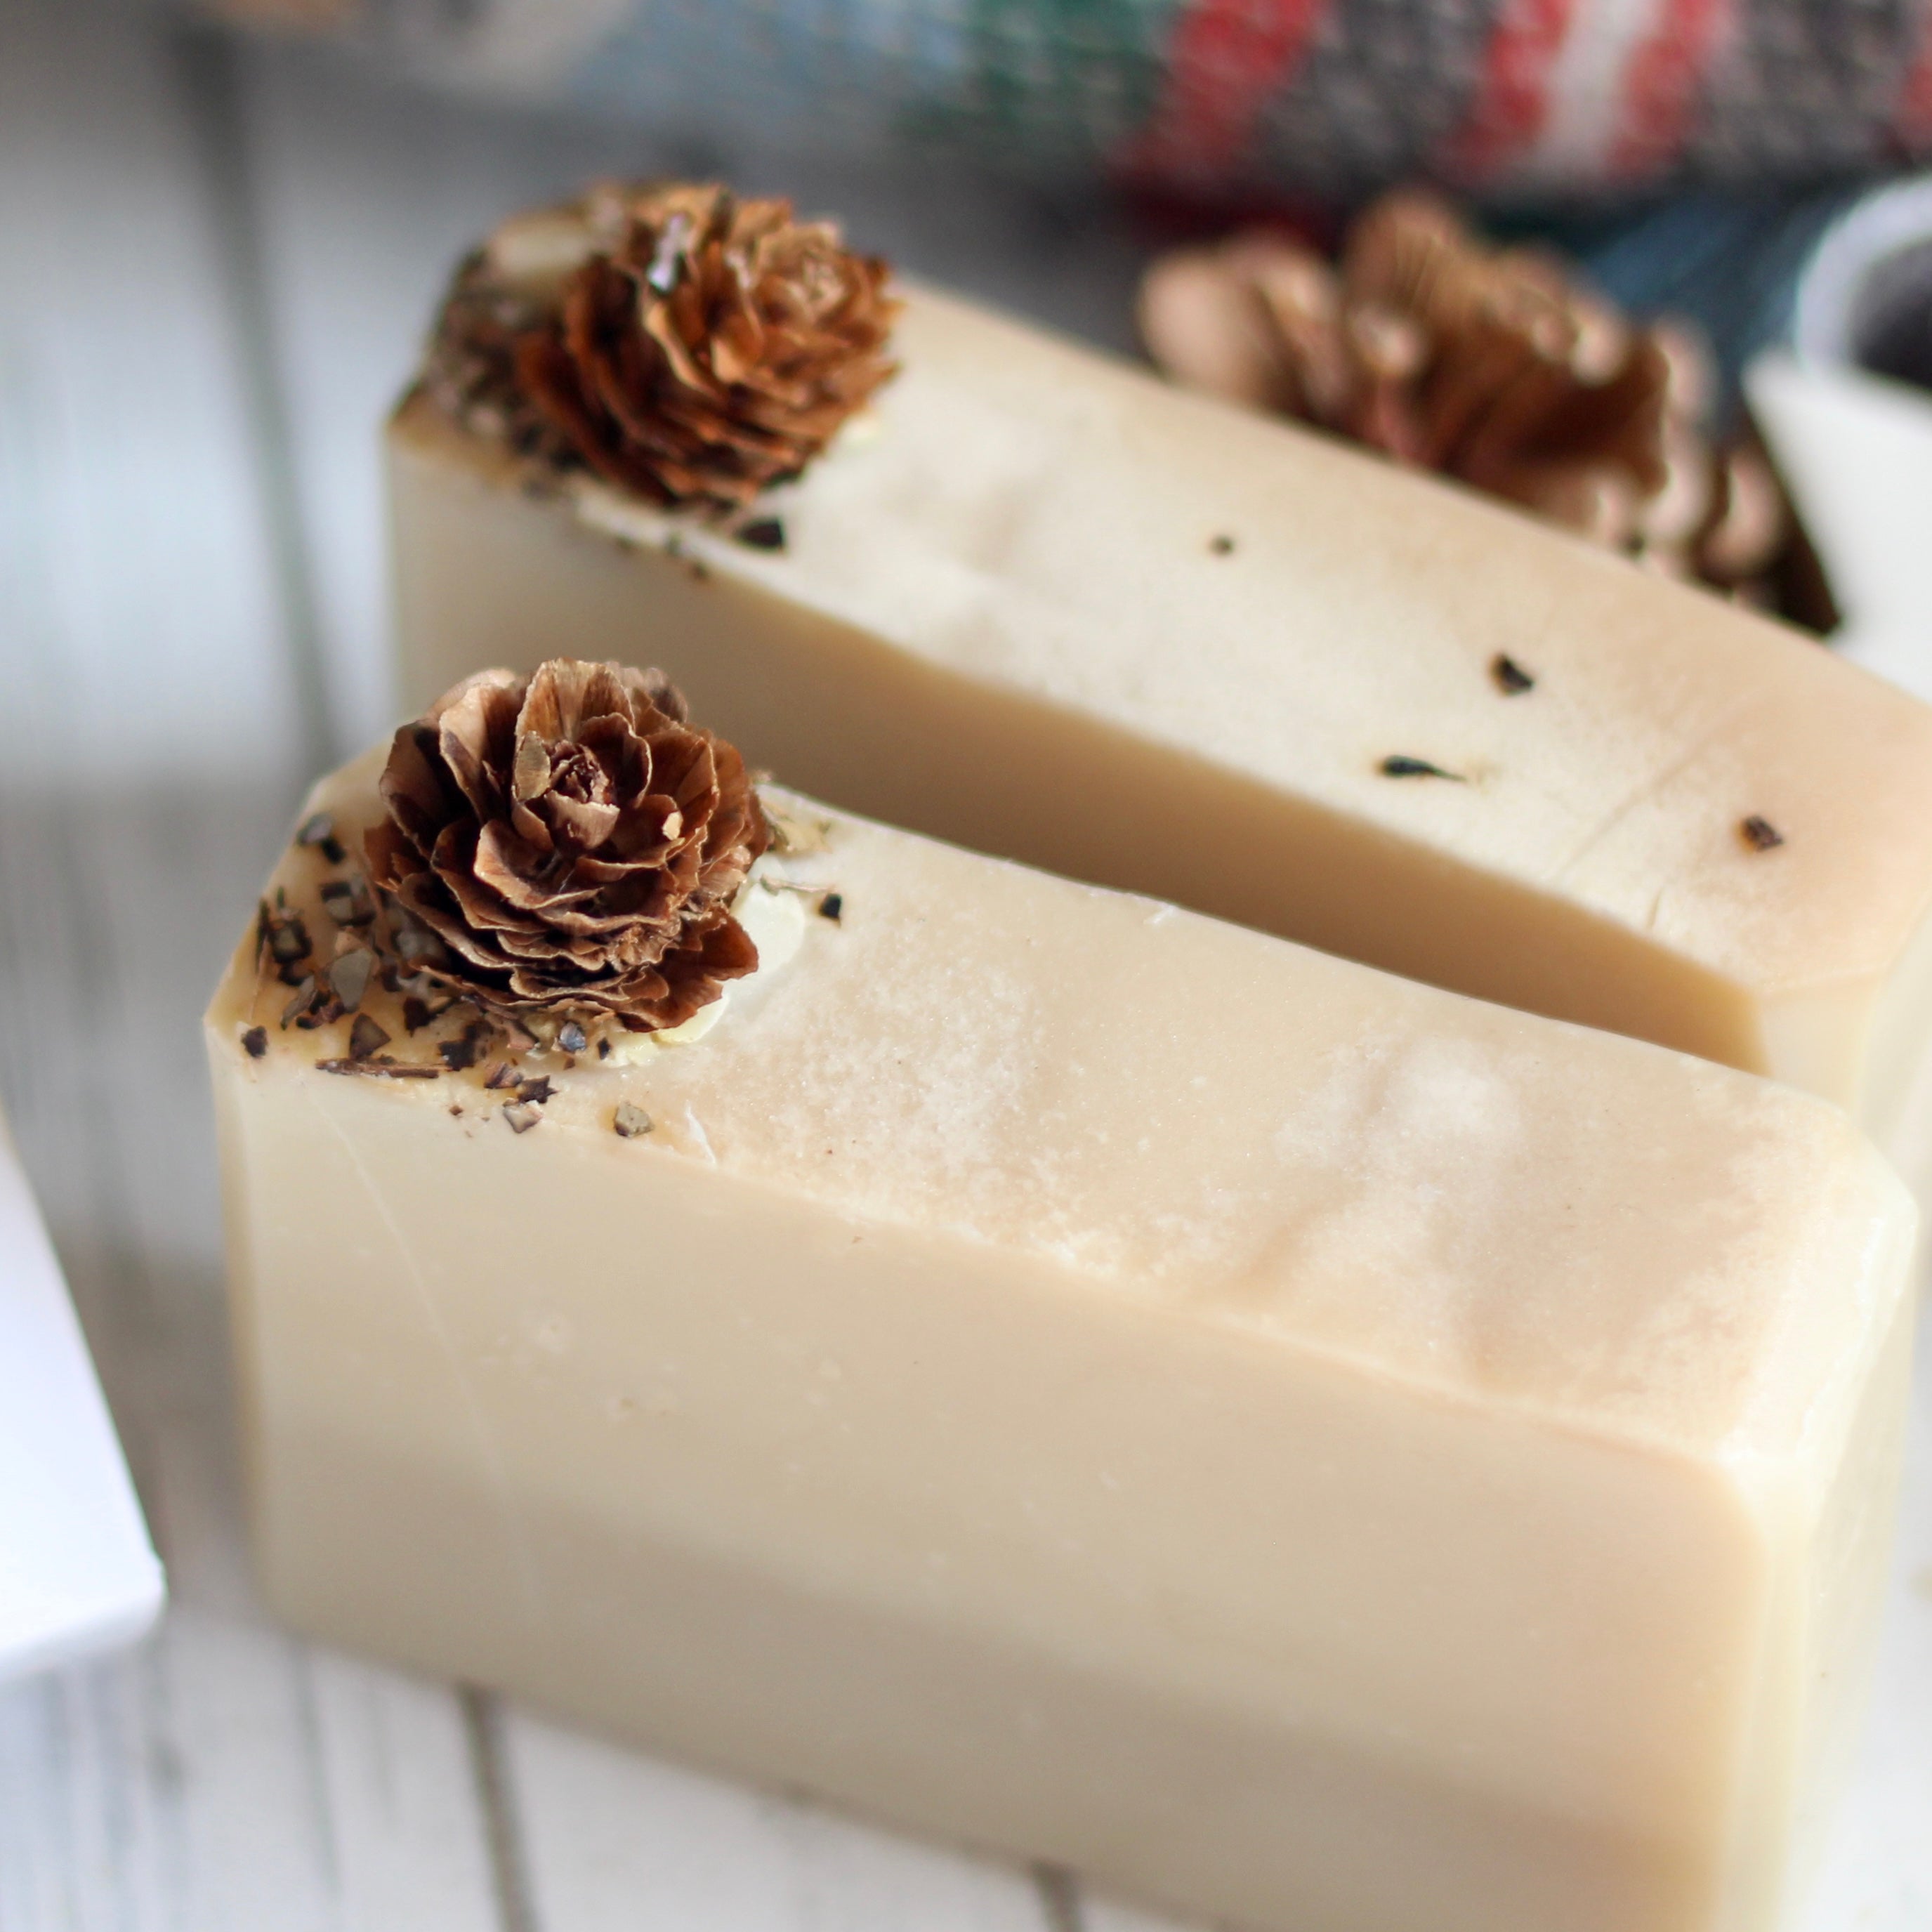 Winter Solstice Lotion Bar – Wicked Soaps Co.